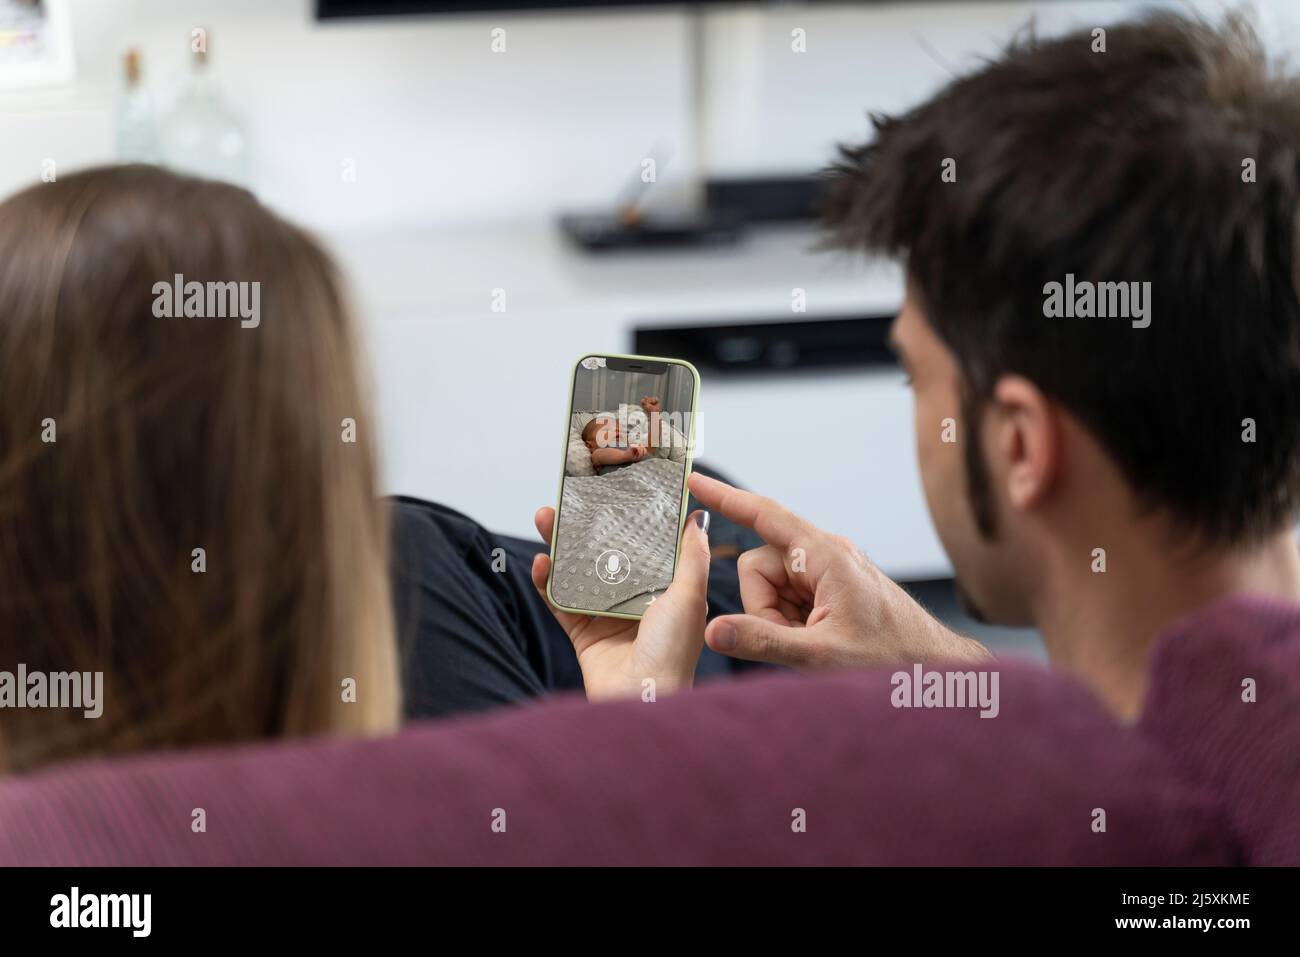 Two parents sitting on the sofa and monitoring their baby on the phone Stock Photo